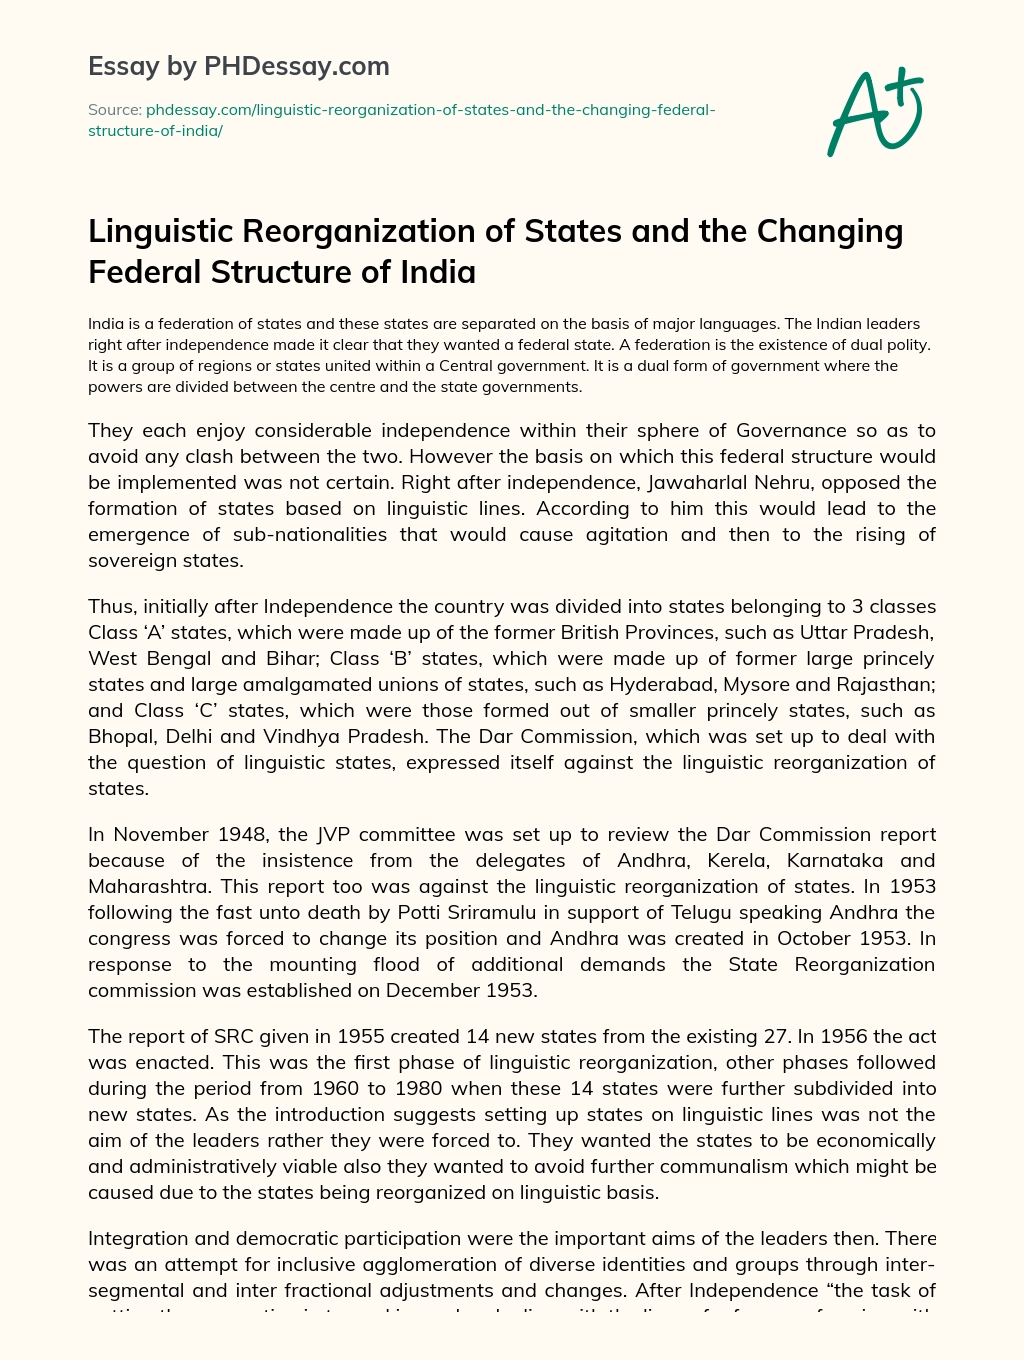 Linguistic Reorganization of States and the Changing Federal Structure of India essay